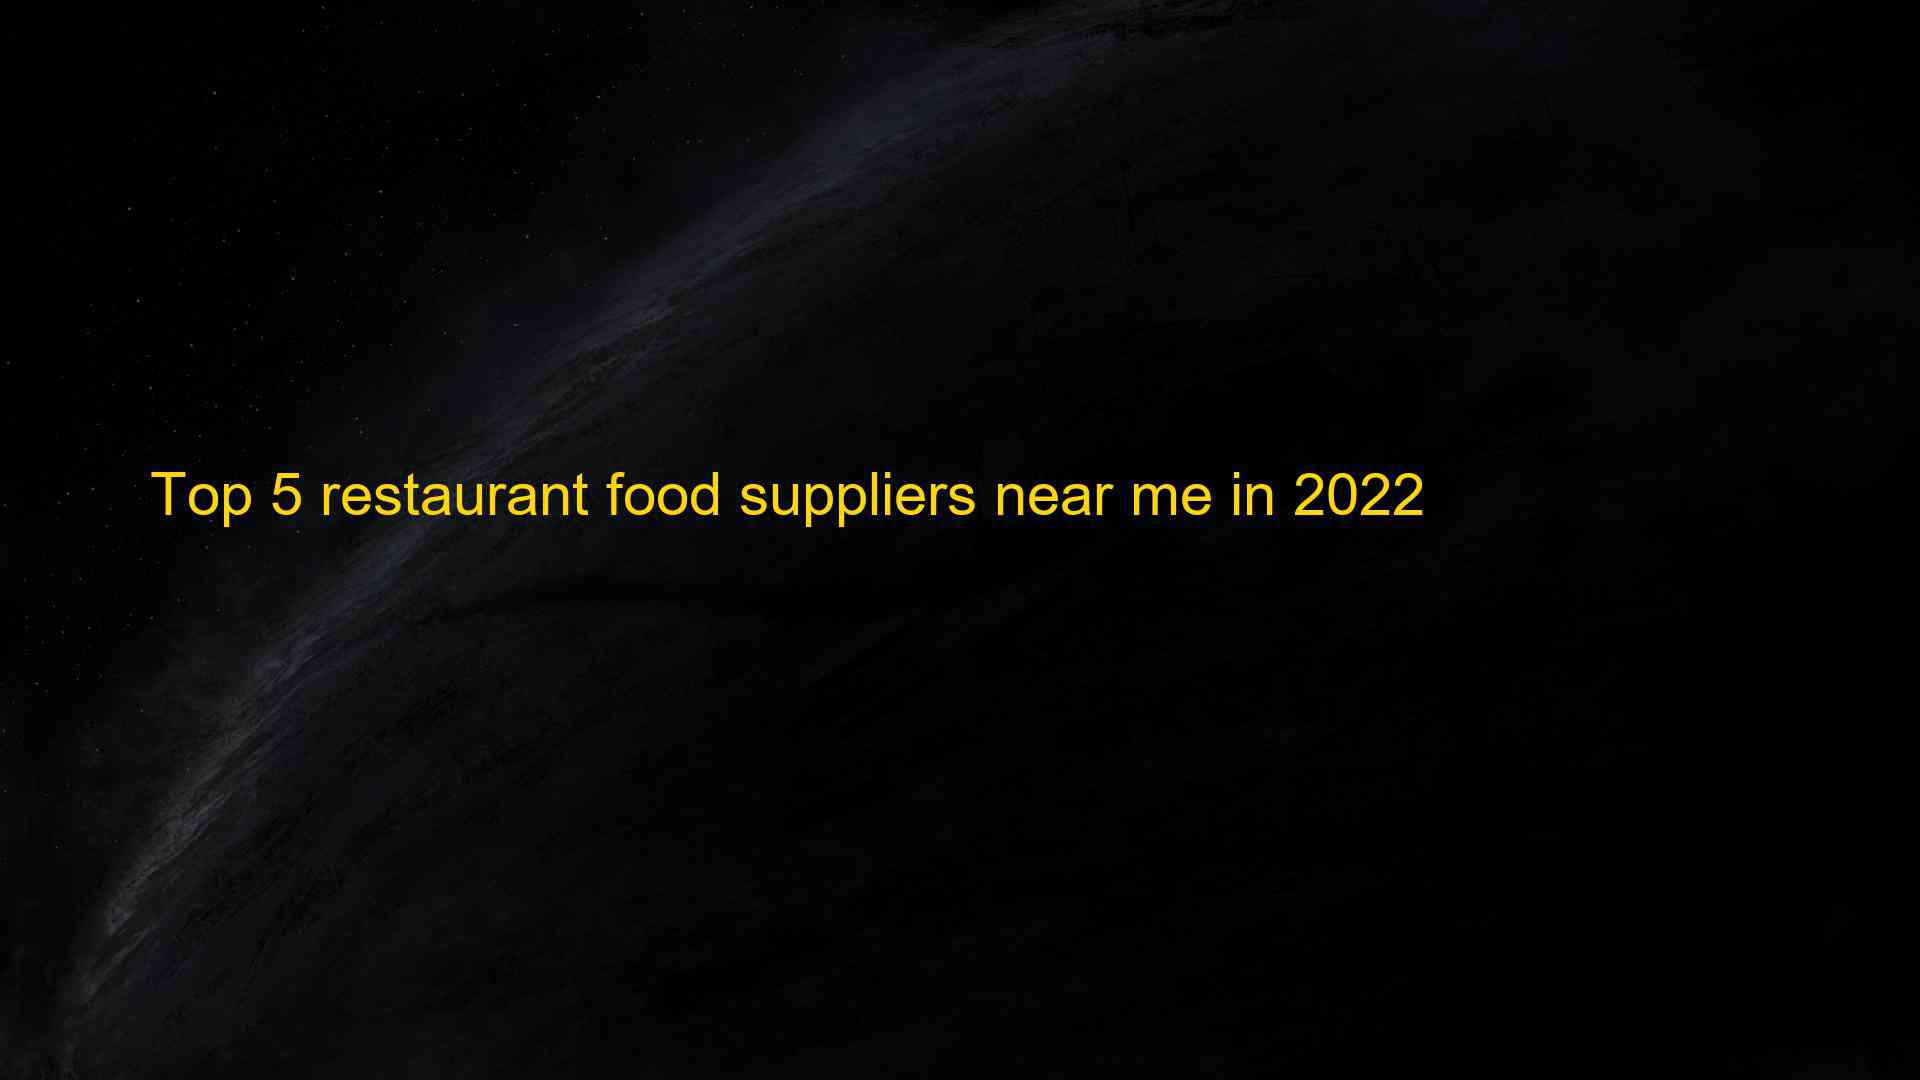 Top 5 restaurant food suppliers near me in 2022 1663200879